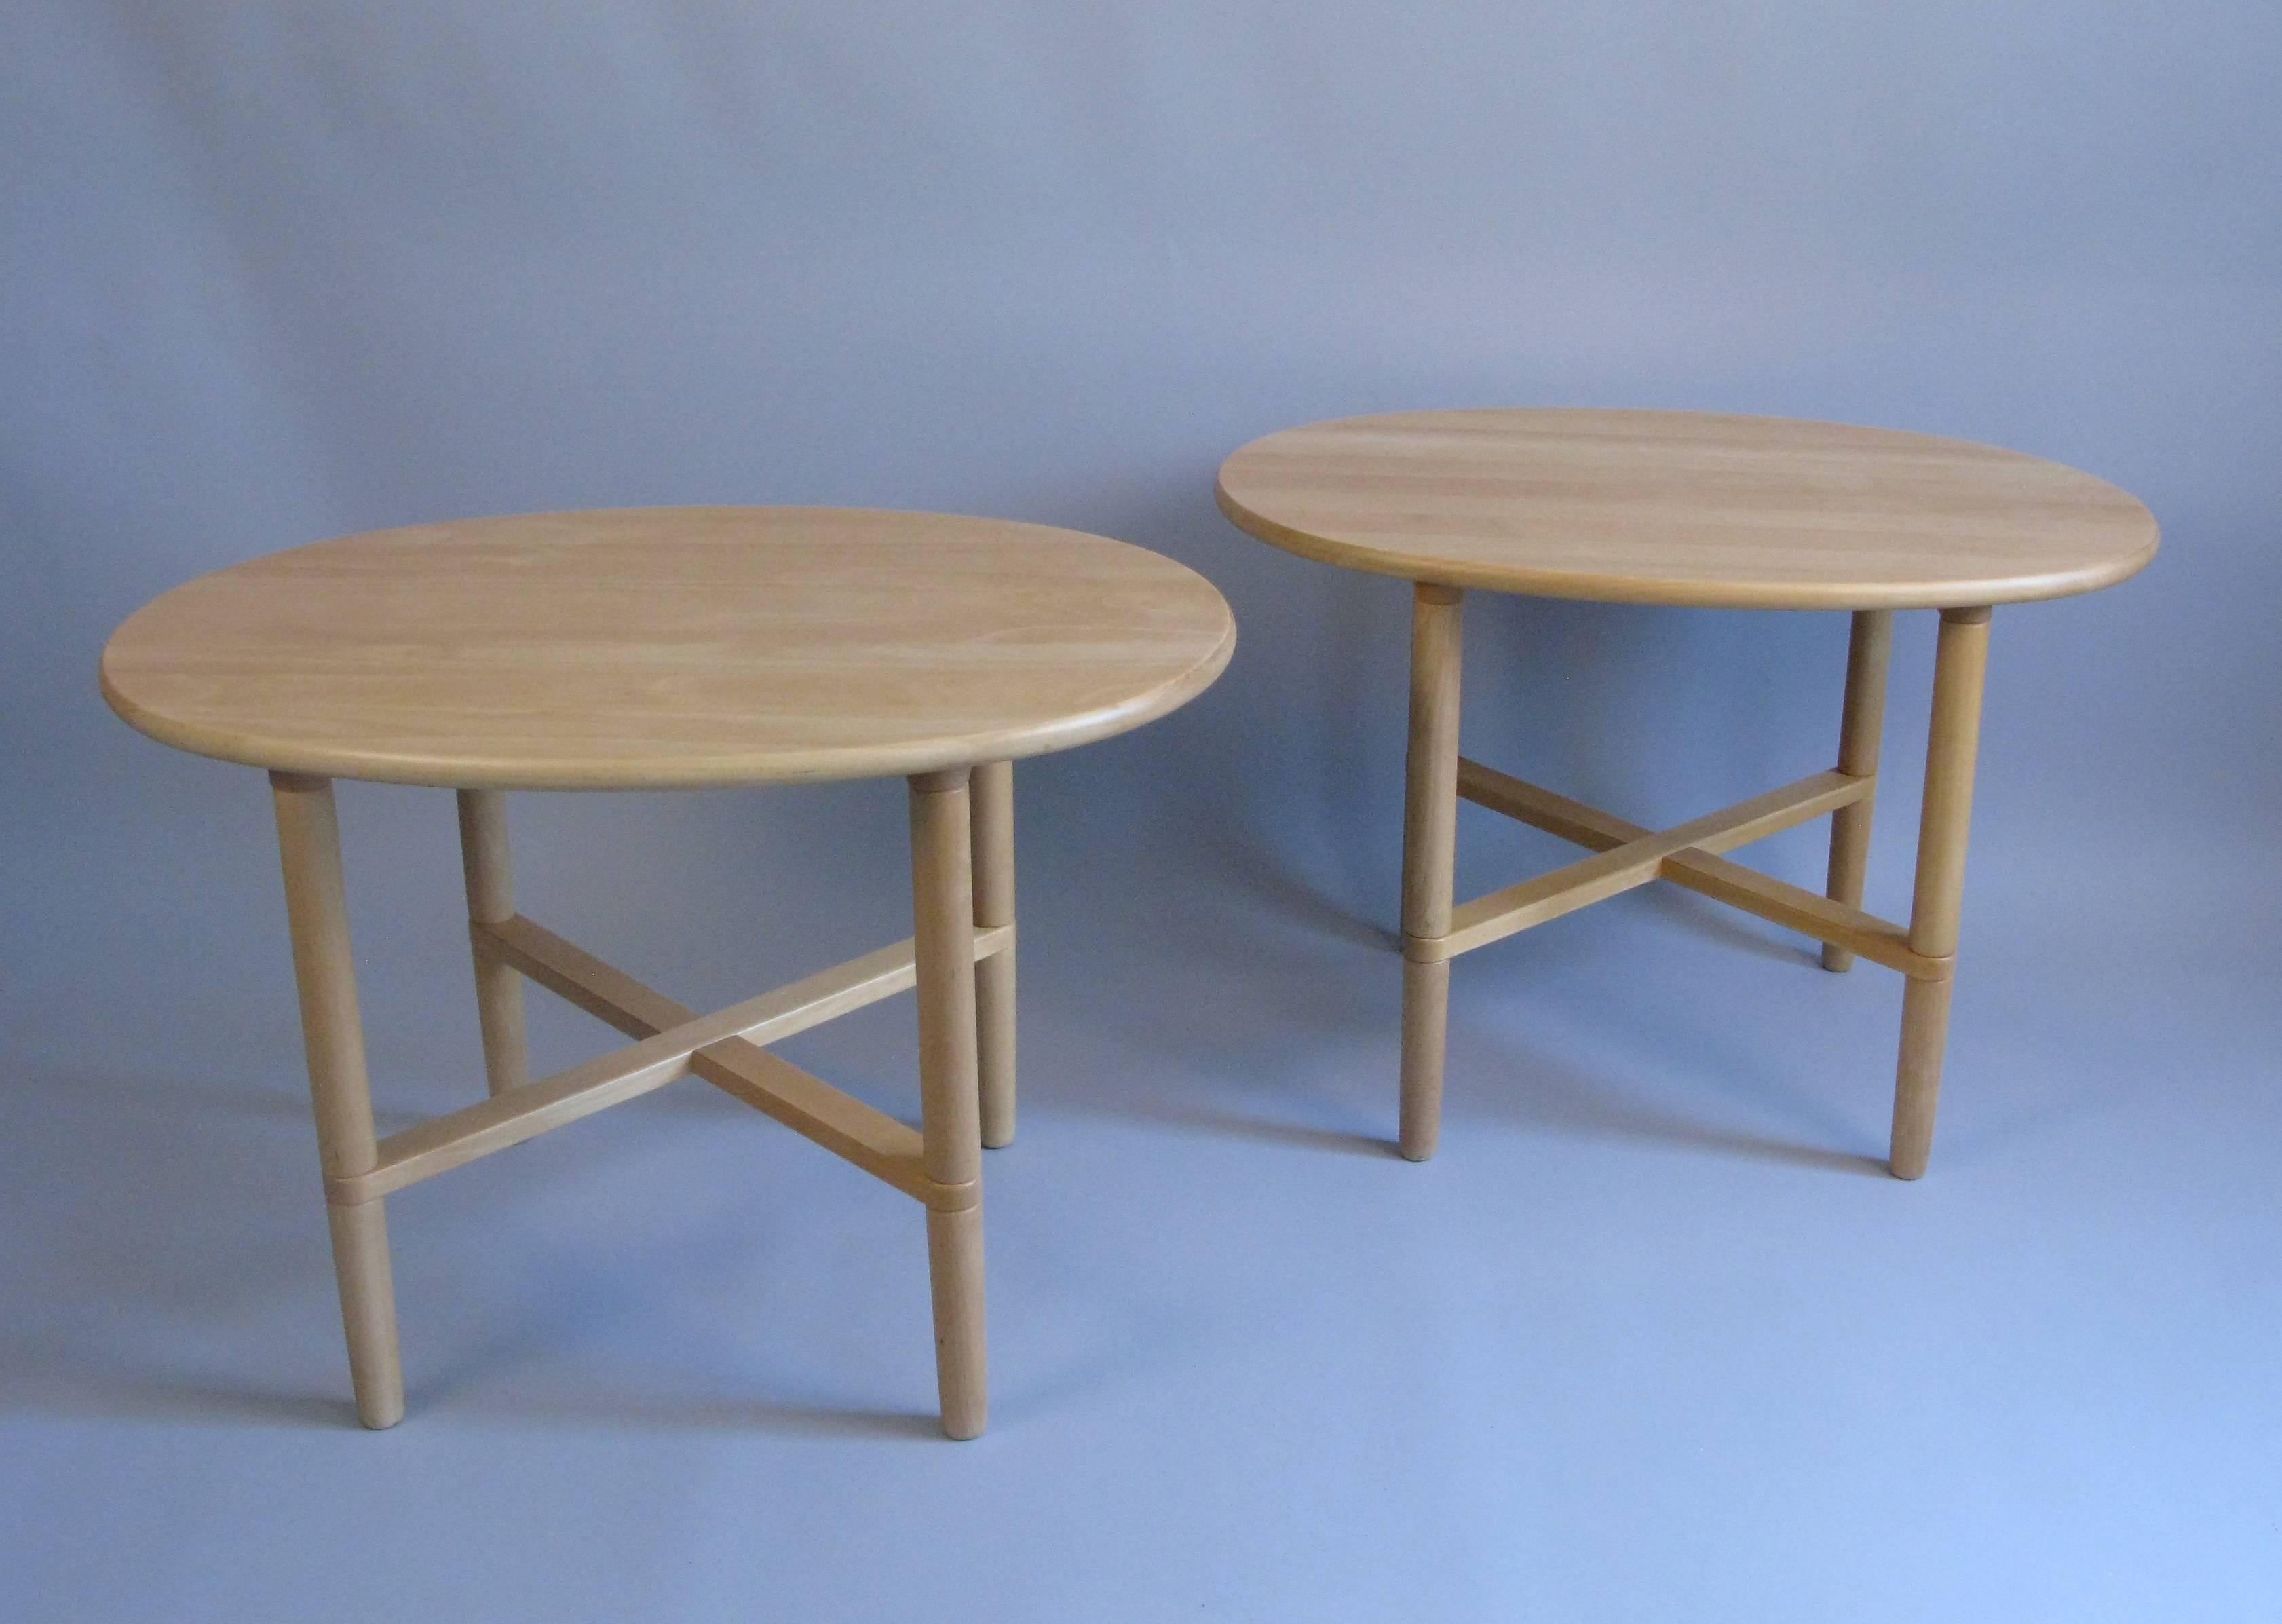 A nice looking pair of oval later 20th century Danish handmade tables by Haslev.